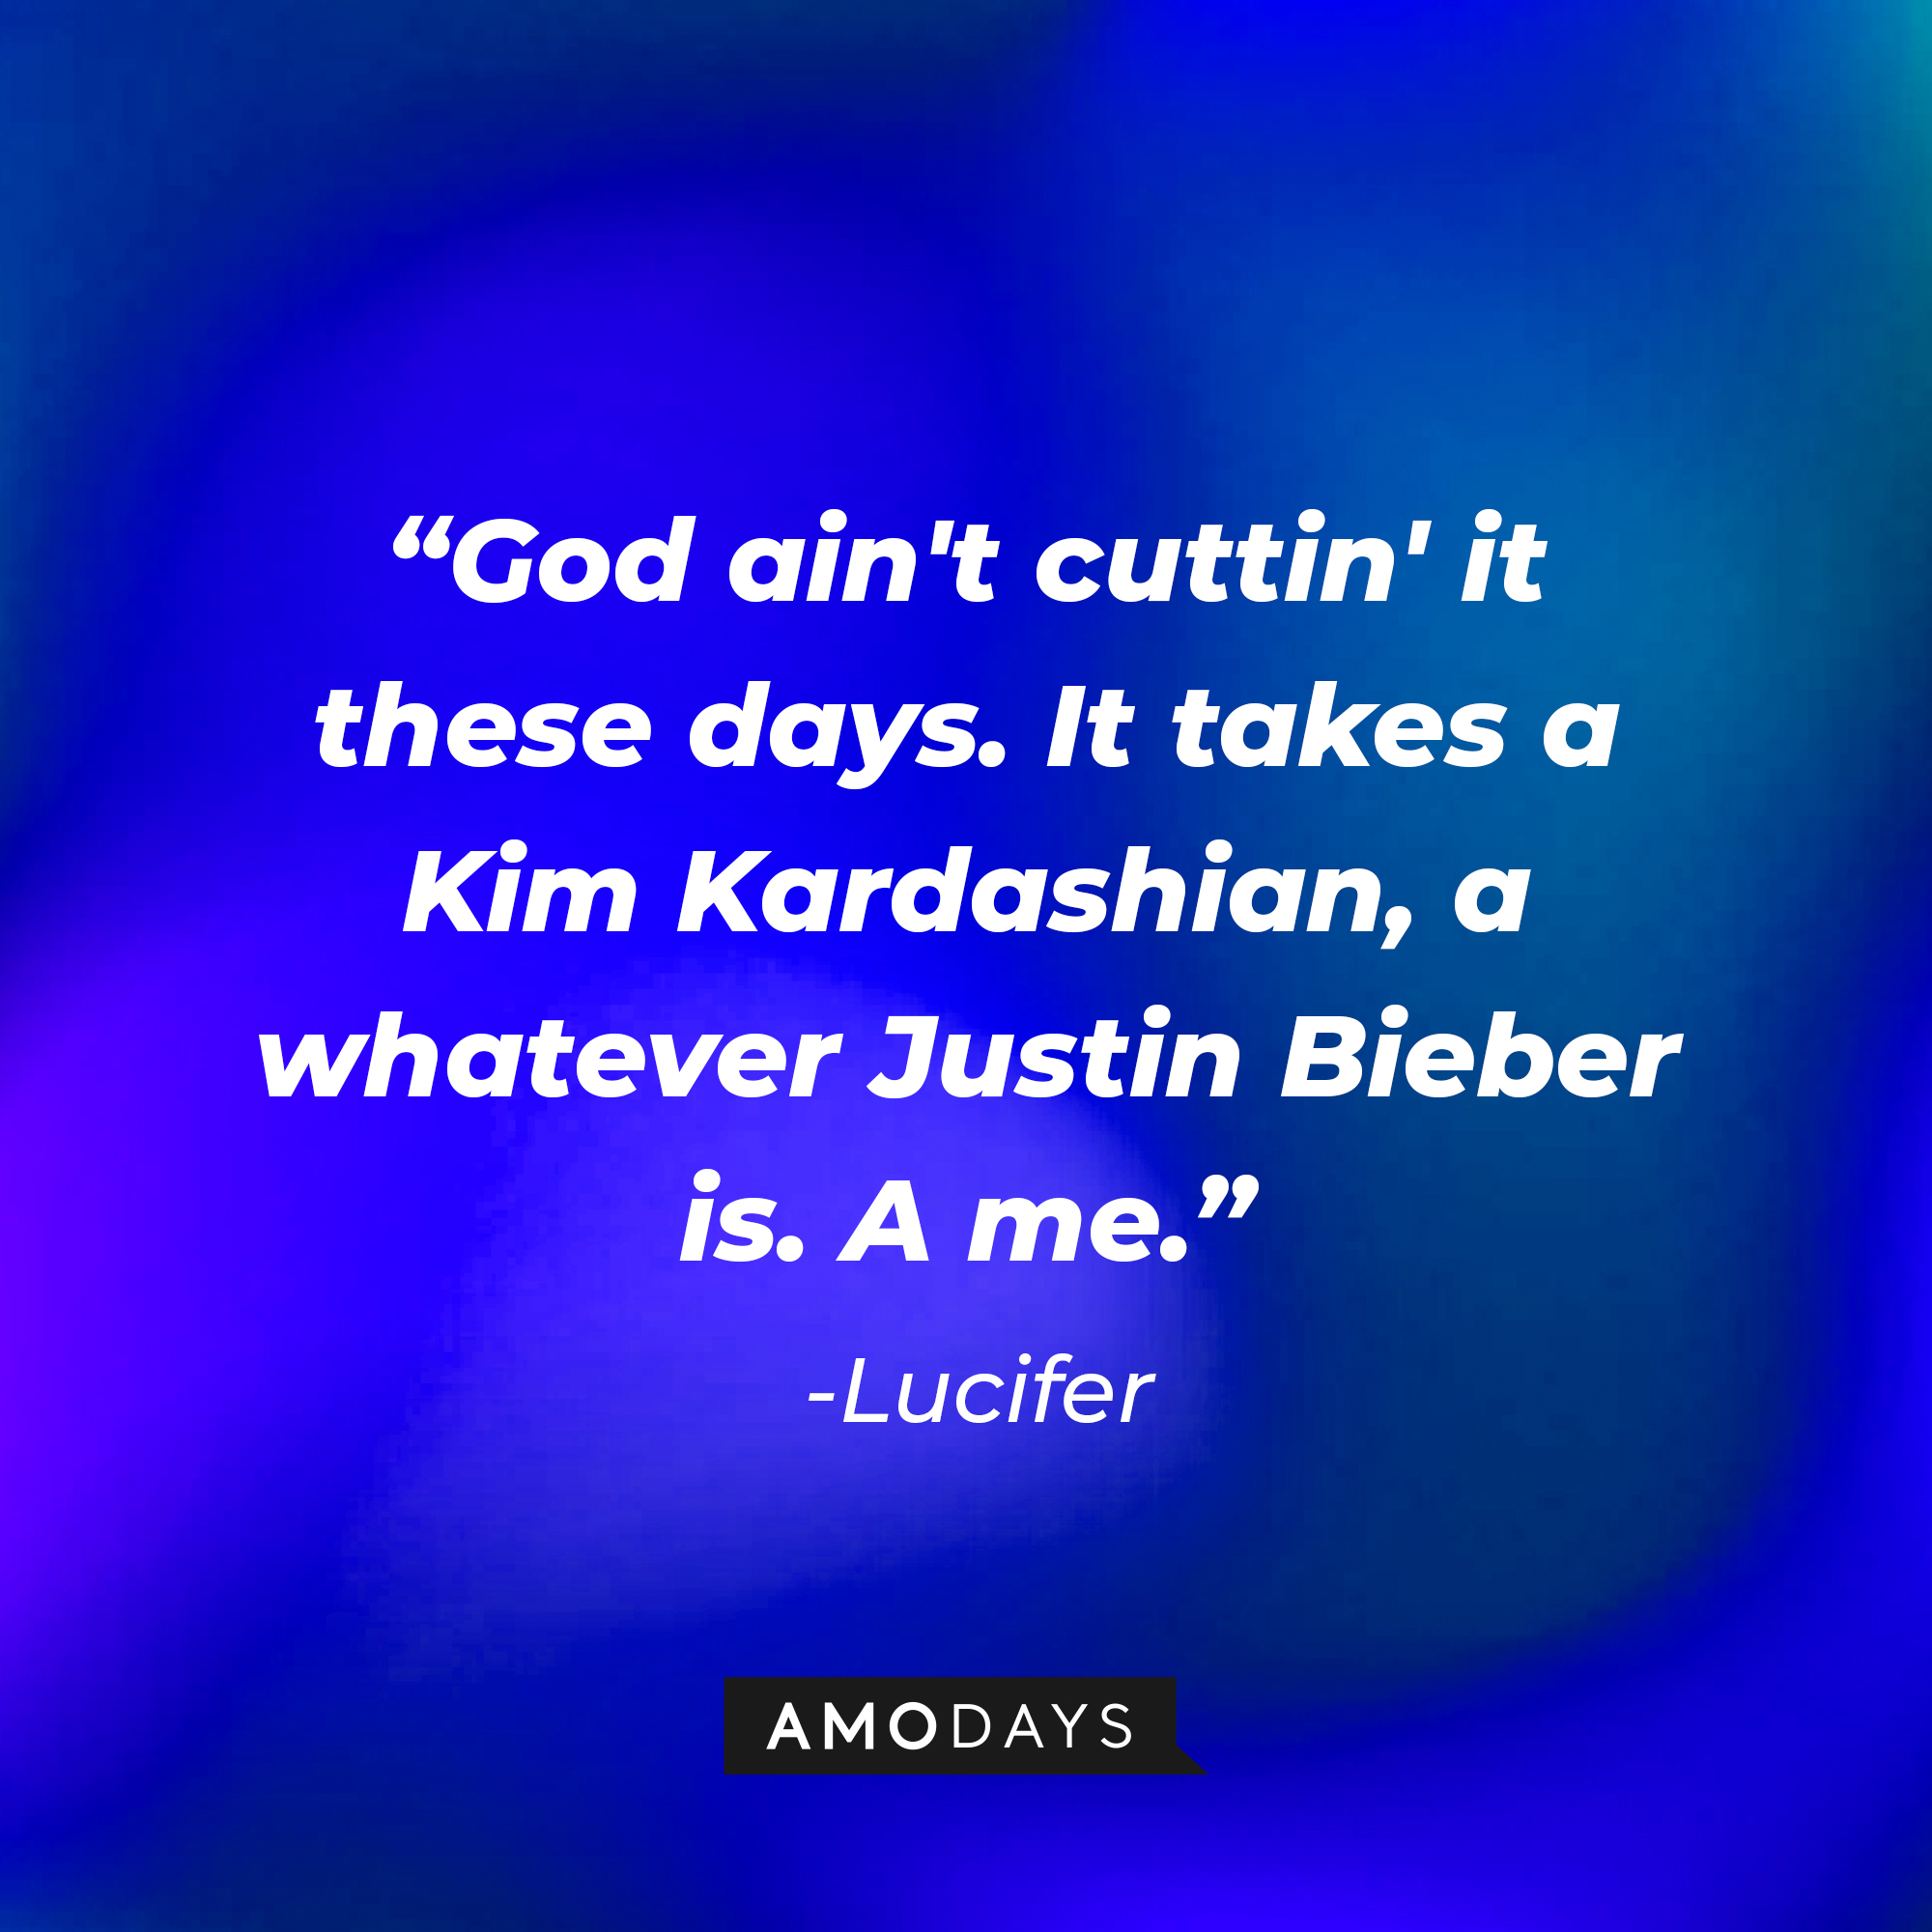 Lucifer’s quote: “God ain't cuttin' it these days. It takes a Kim Kardashian, a whatever Justin Bieber is. A me.” | Source: AmoDays